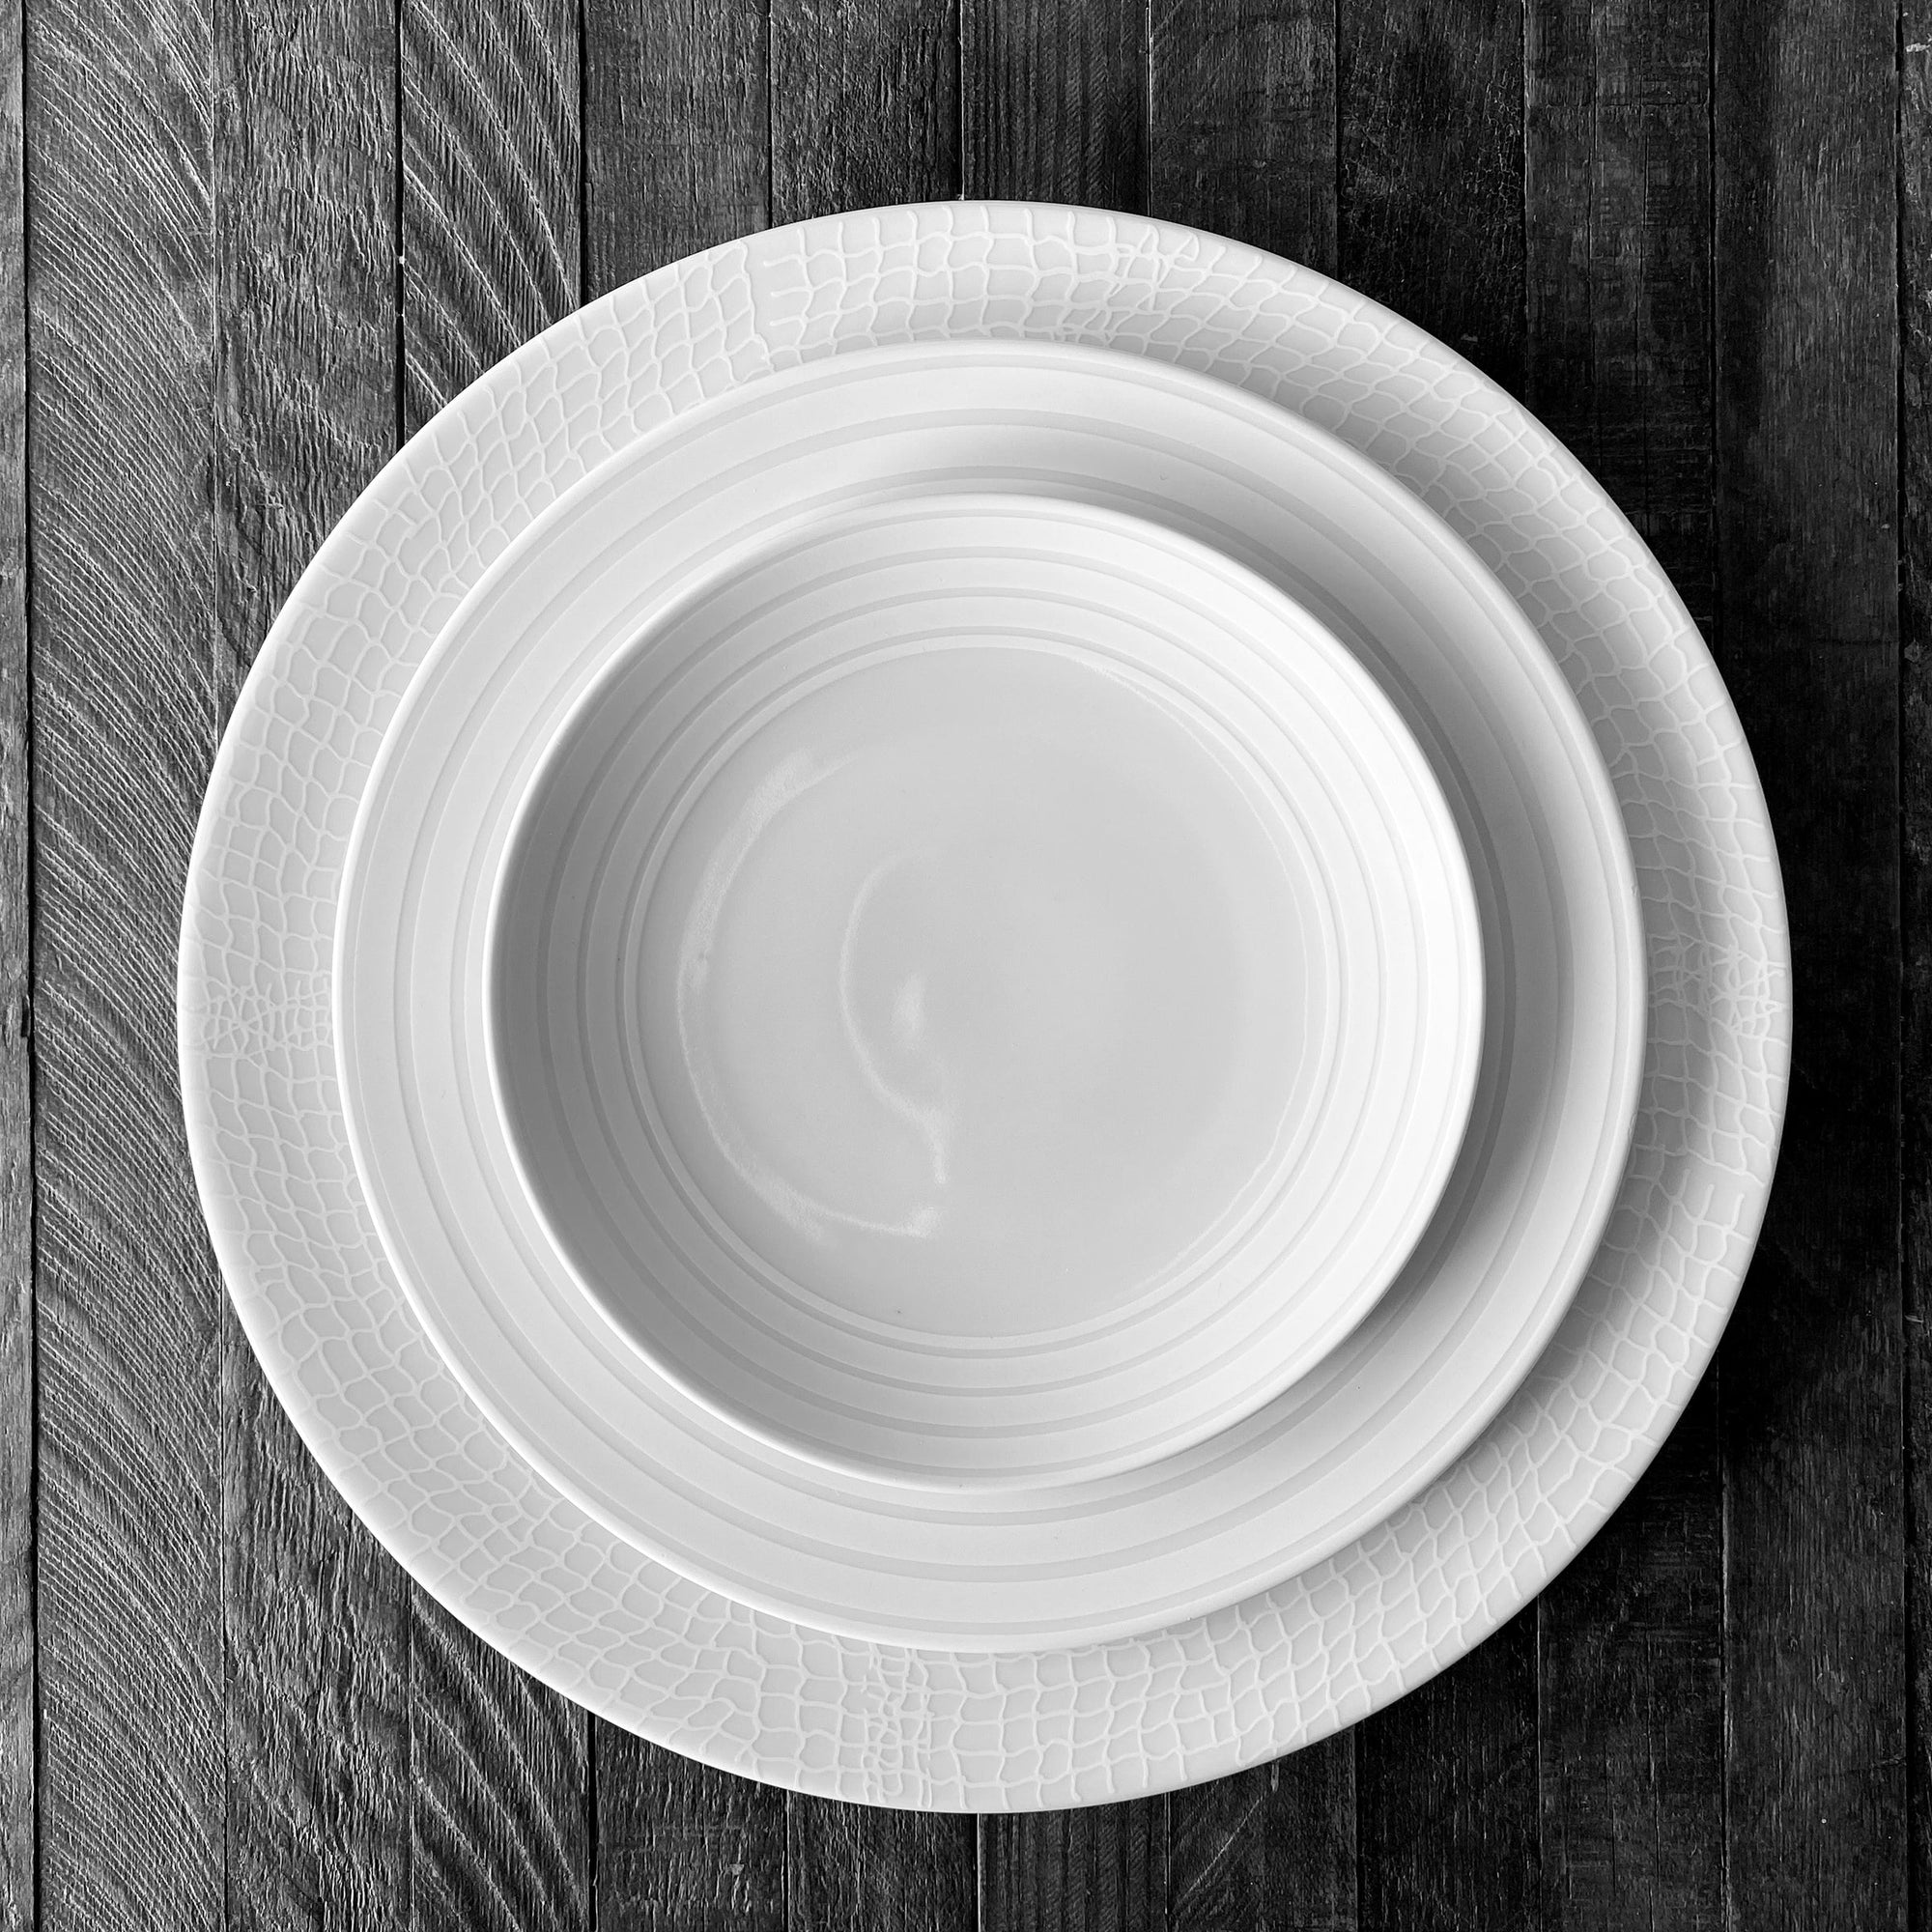 Four white, round plates with simple, concentric circle designs on the edges in the elegant **Cambridge Stripe Small Plates** pattern are arranged in a staggered layout against a plain white background. **Caskata Artisanal Home**